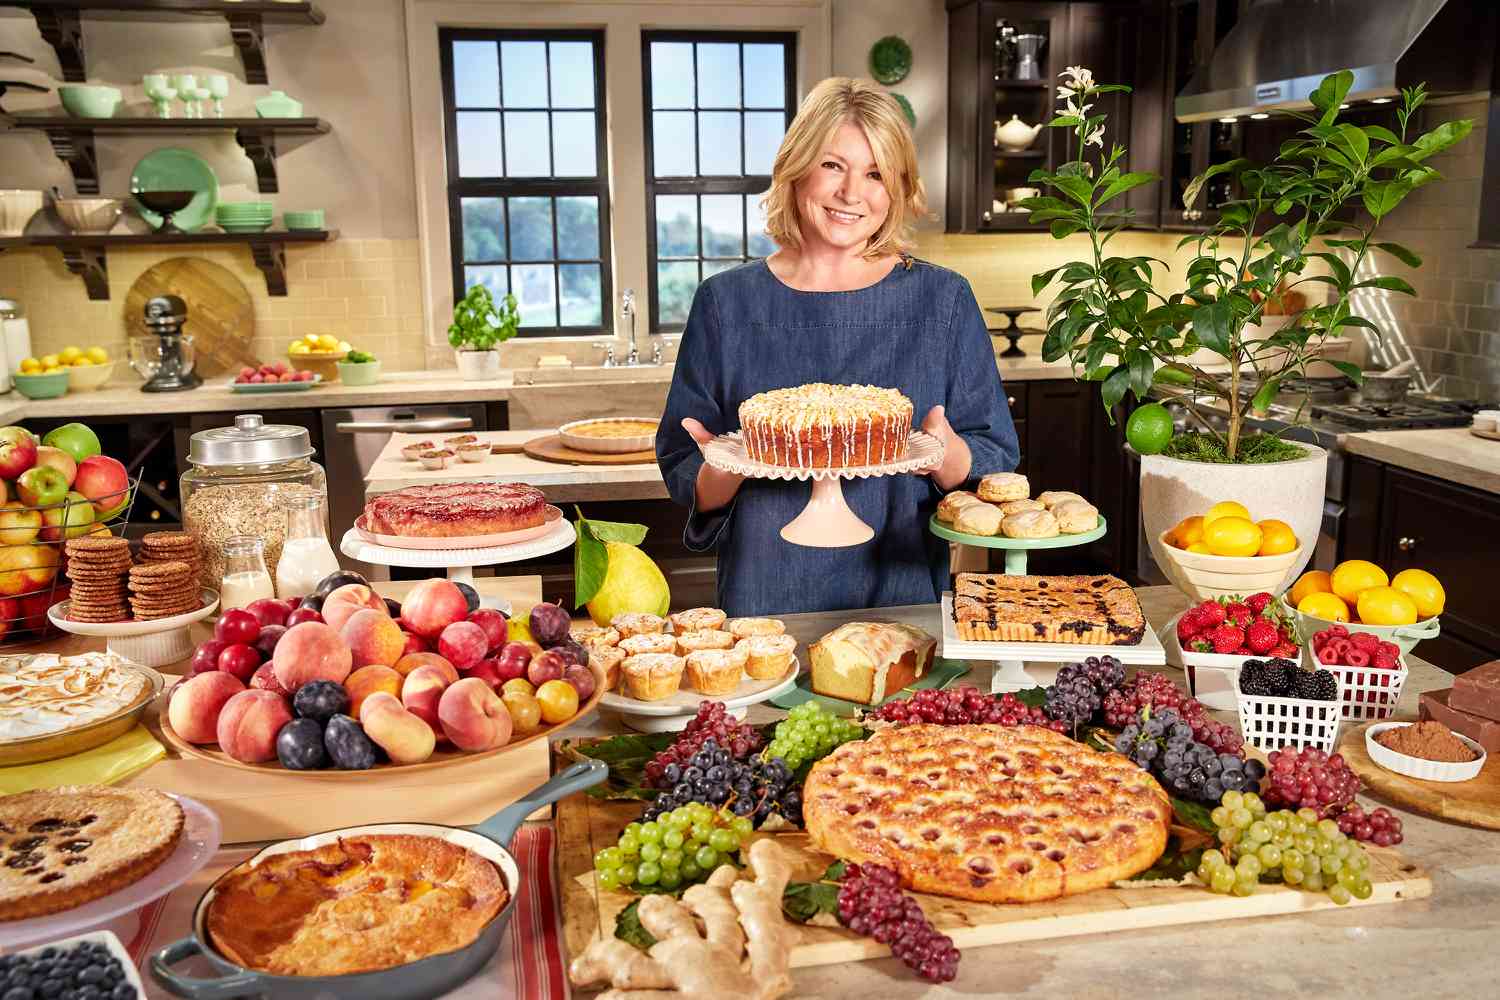 martha in kitchen holding cake surrounded by desserts